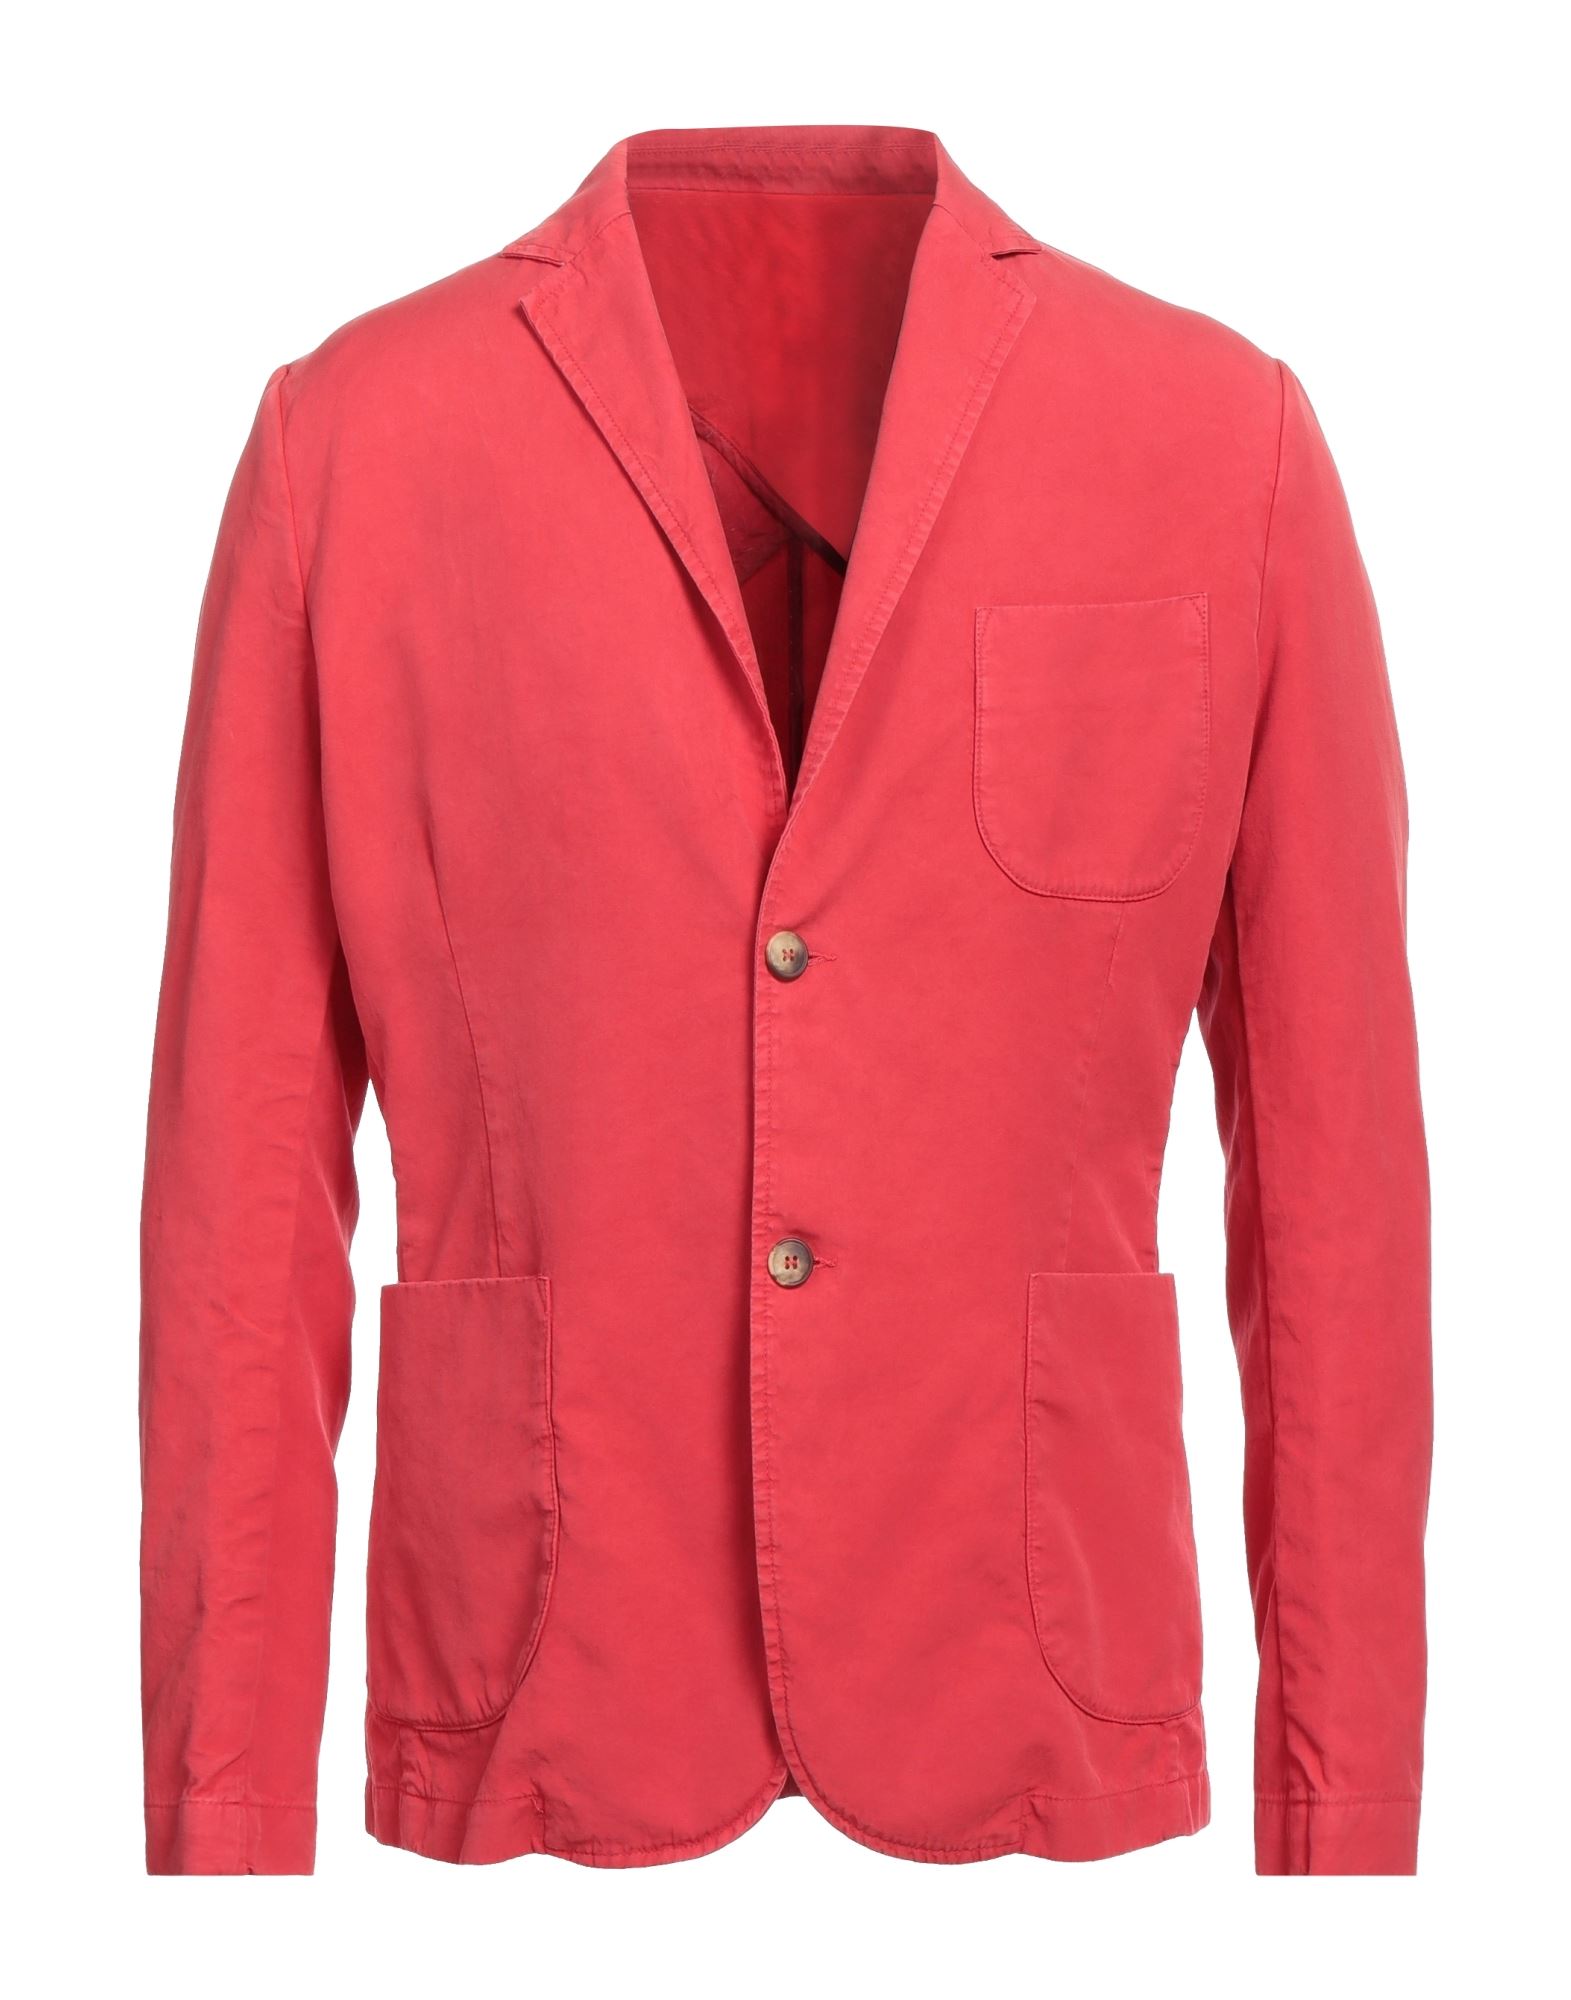 Original Vintage Style Suit Jackets In Red